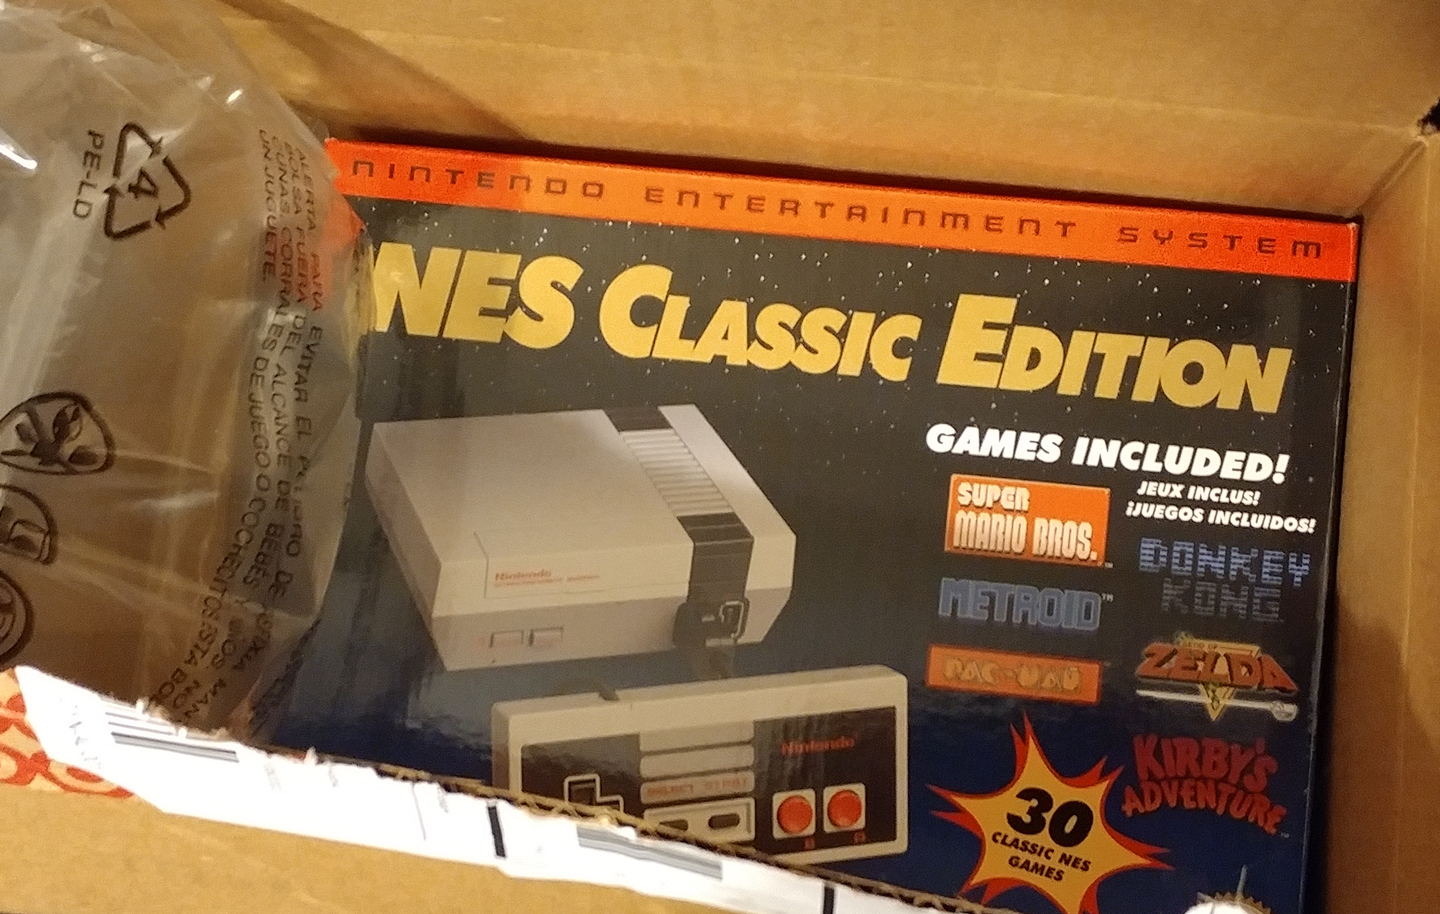 NES Classic Edition HDMI USB 30 games target preorder